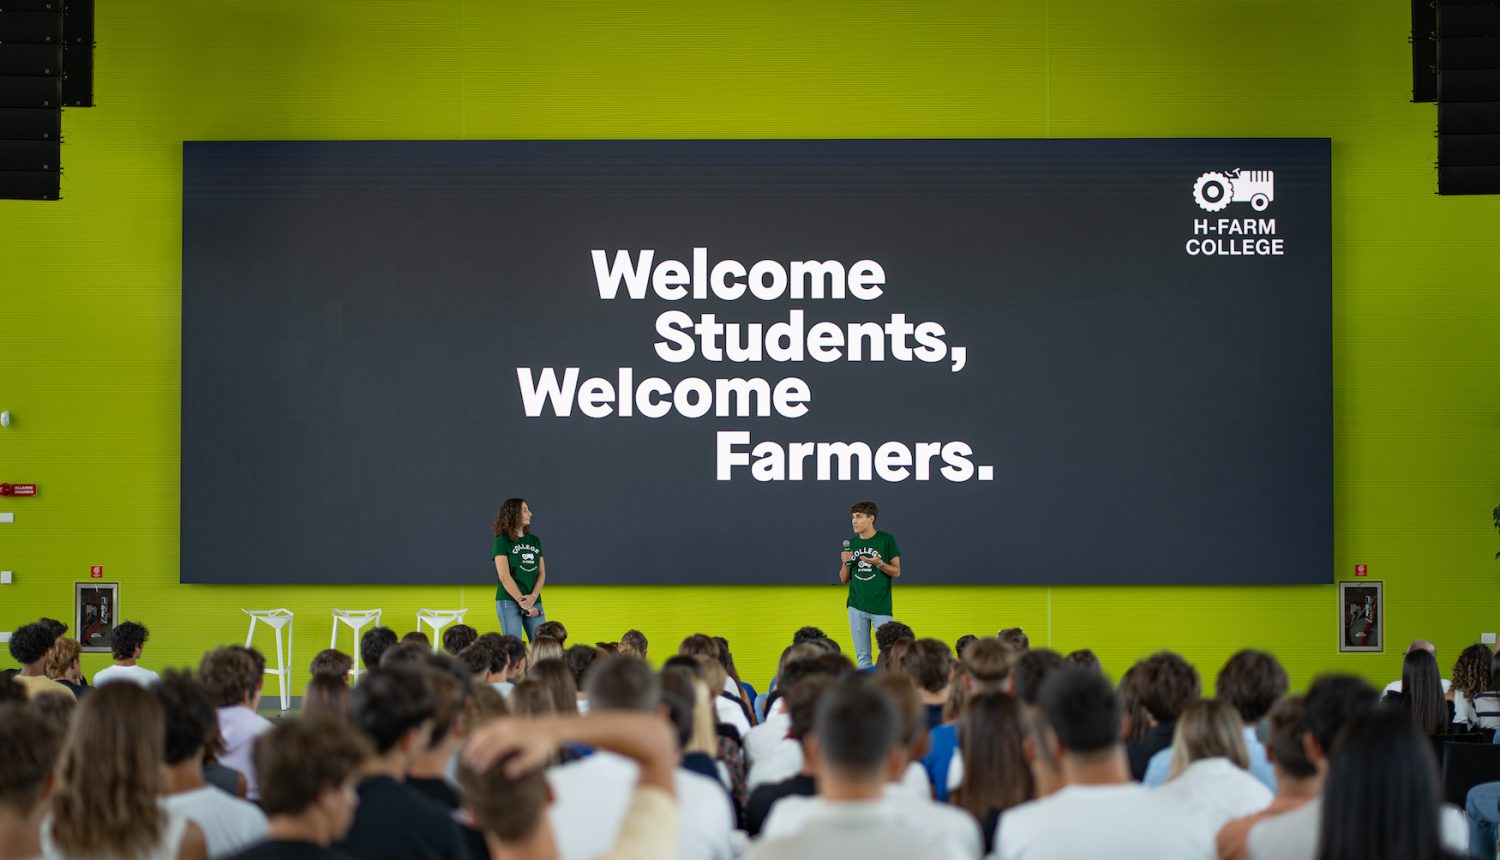 Welcome Students, Welcome Farmers!